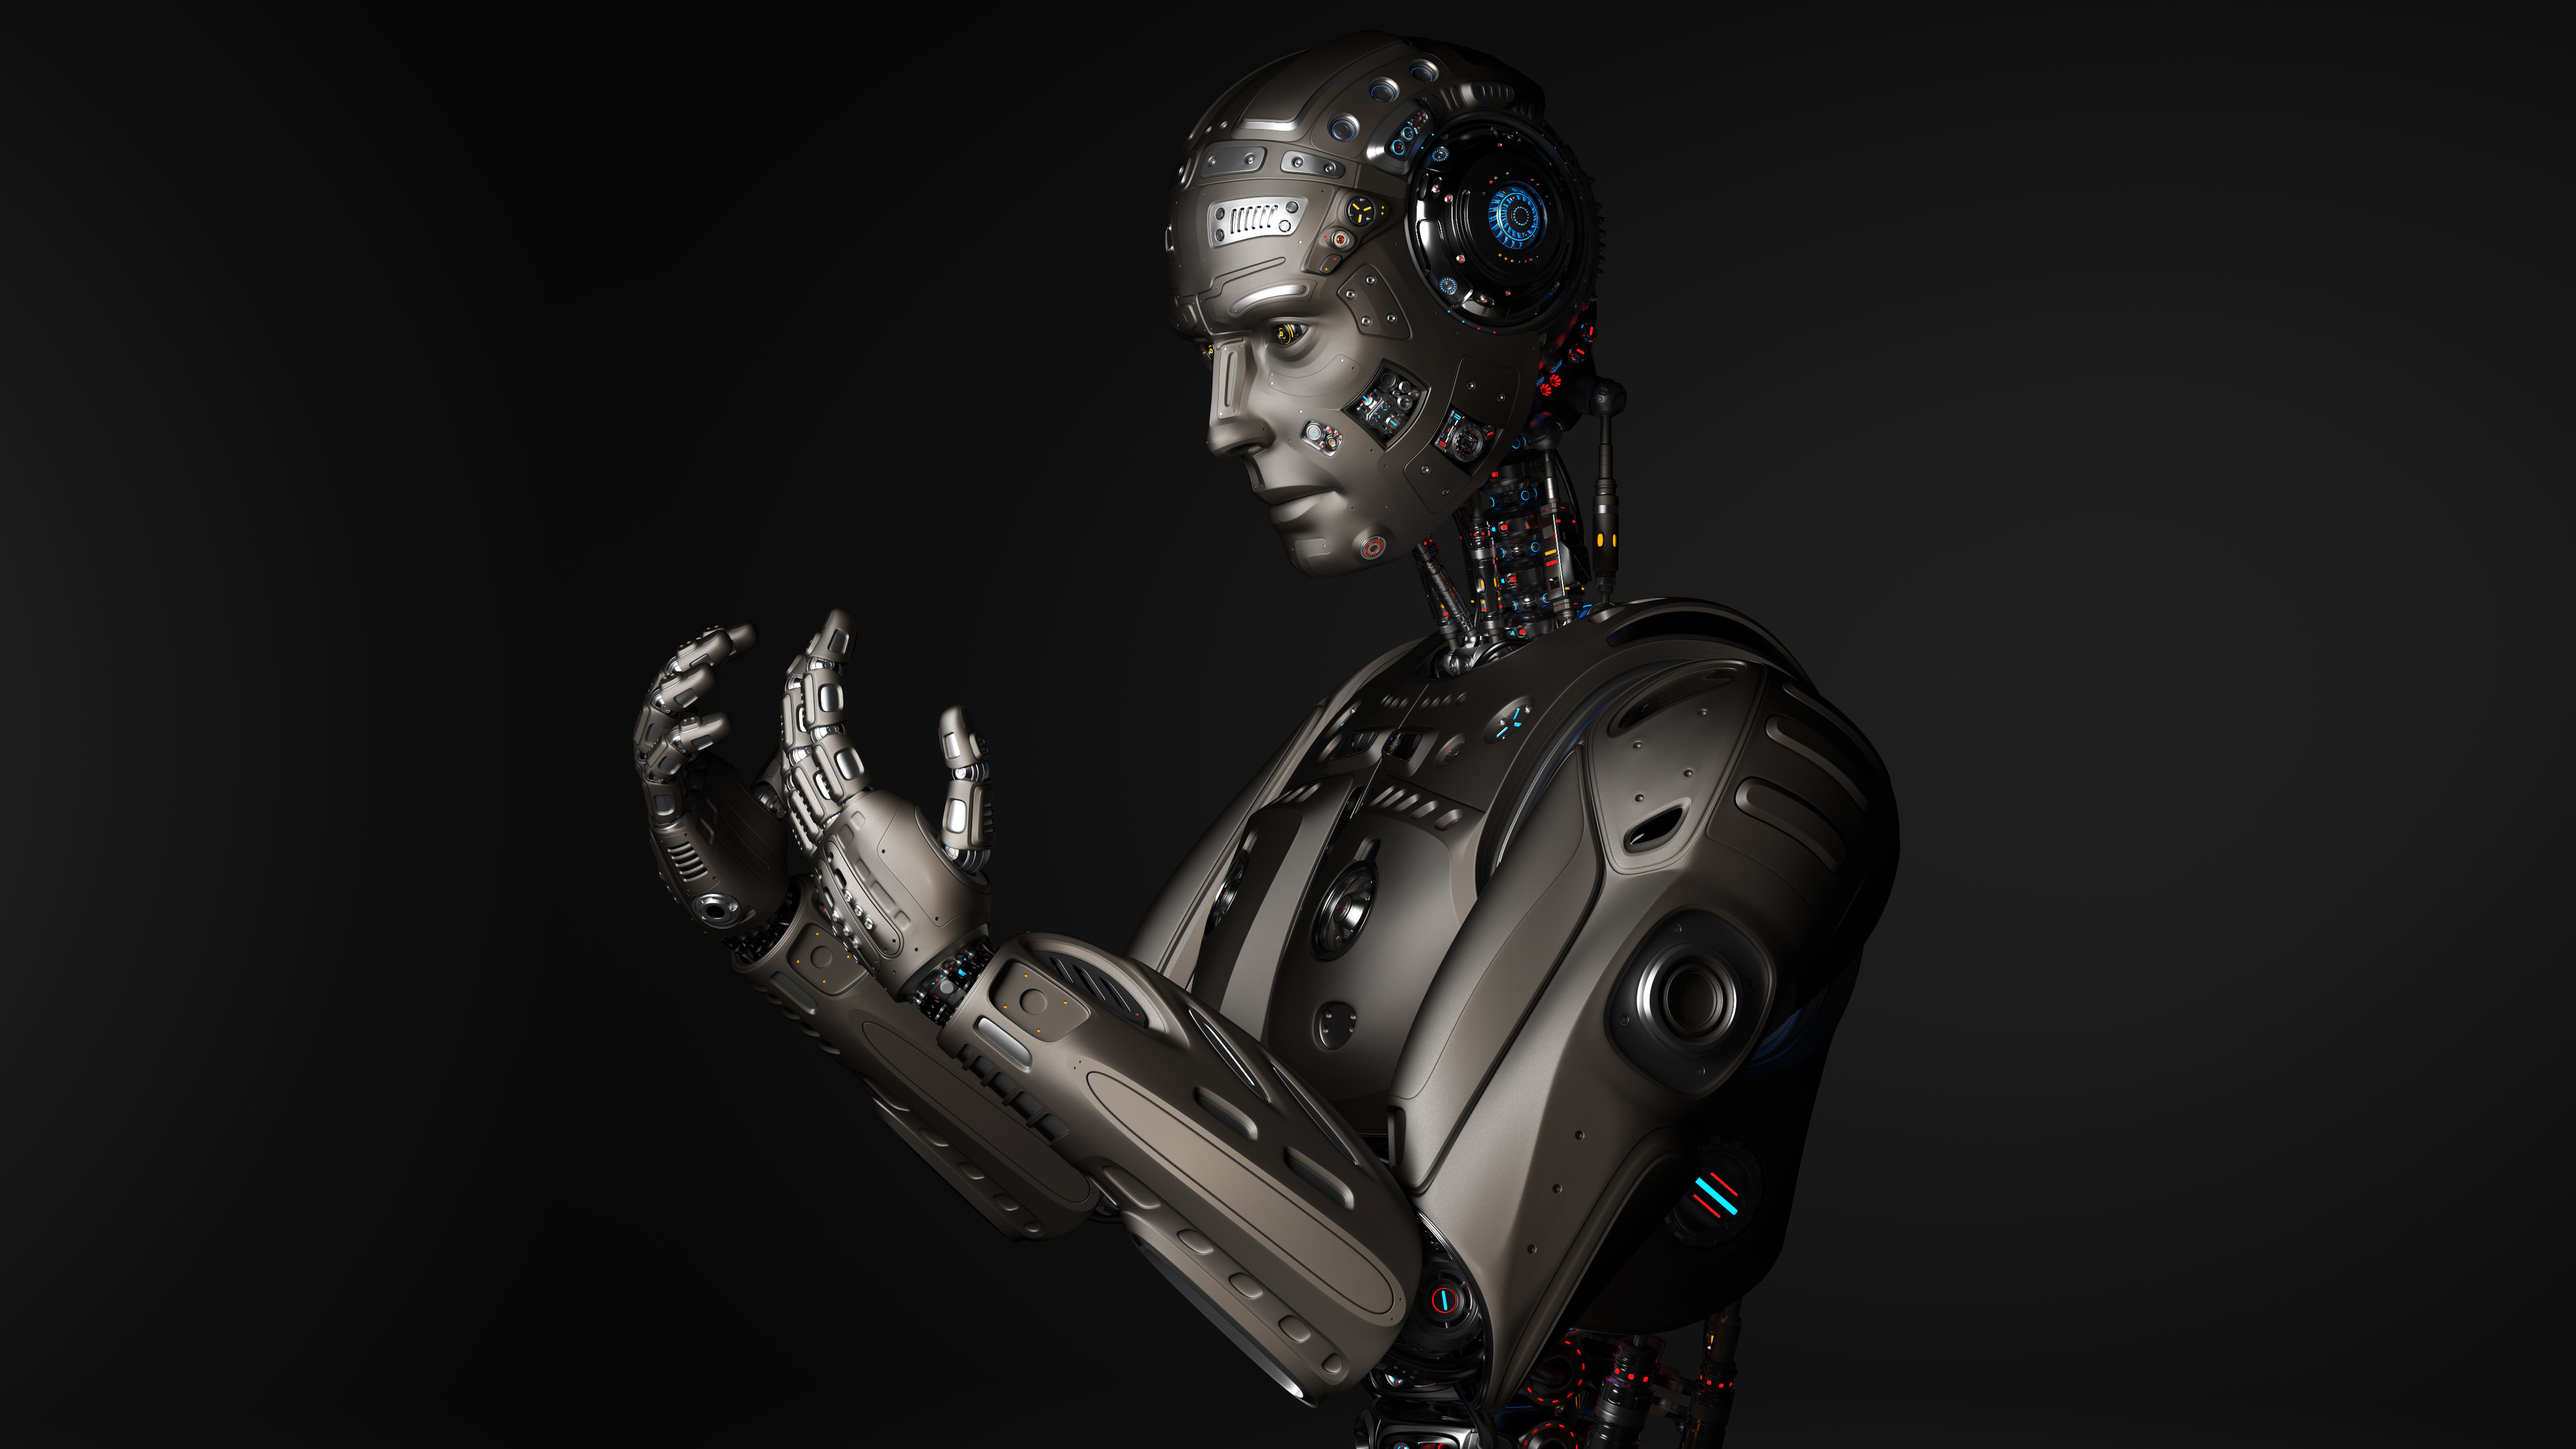 Robot: Artificial human being, Performing functions in a humanlike manner. 3840x2160 4K Background.